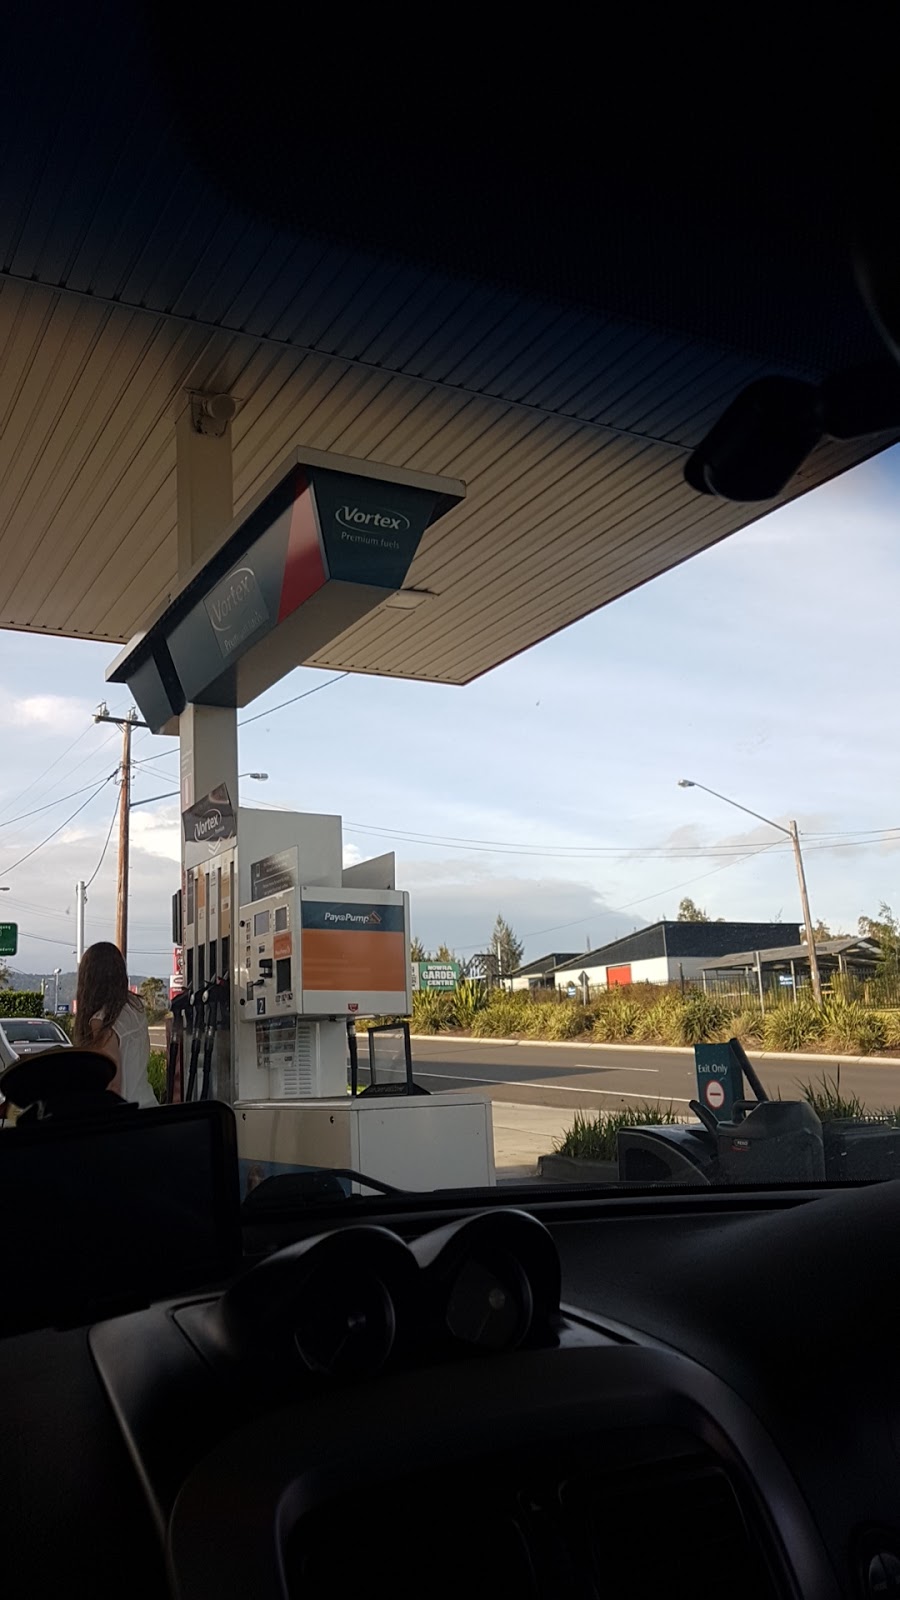 The Foodary Caltex Bomaderry | 341 Princes Hwy, Bomaderry NSW 2541, Australia | Phone: (02) 4421 6438